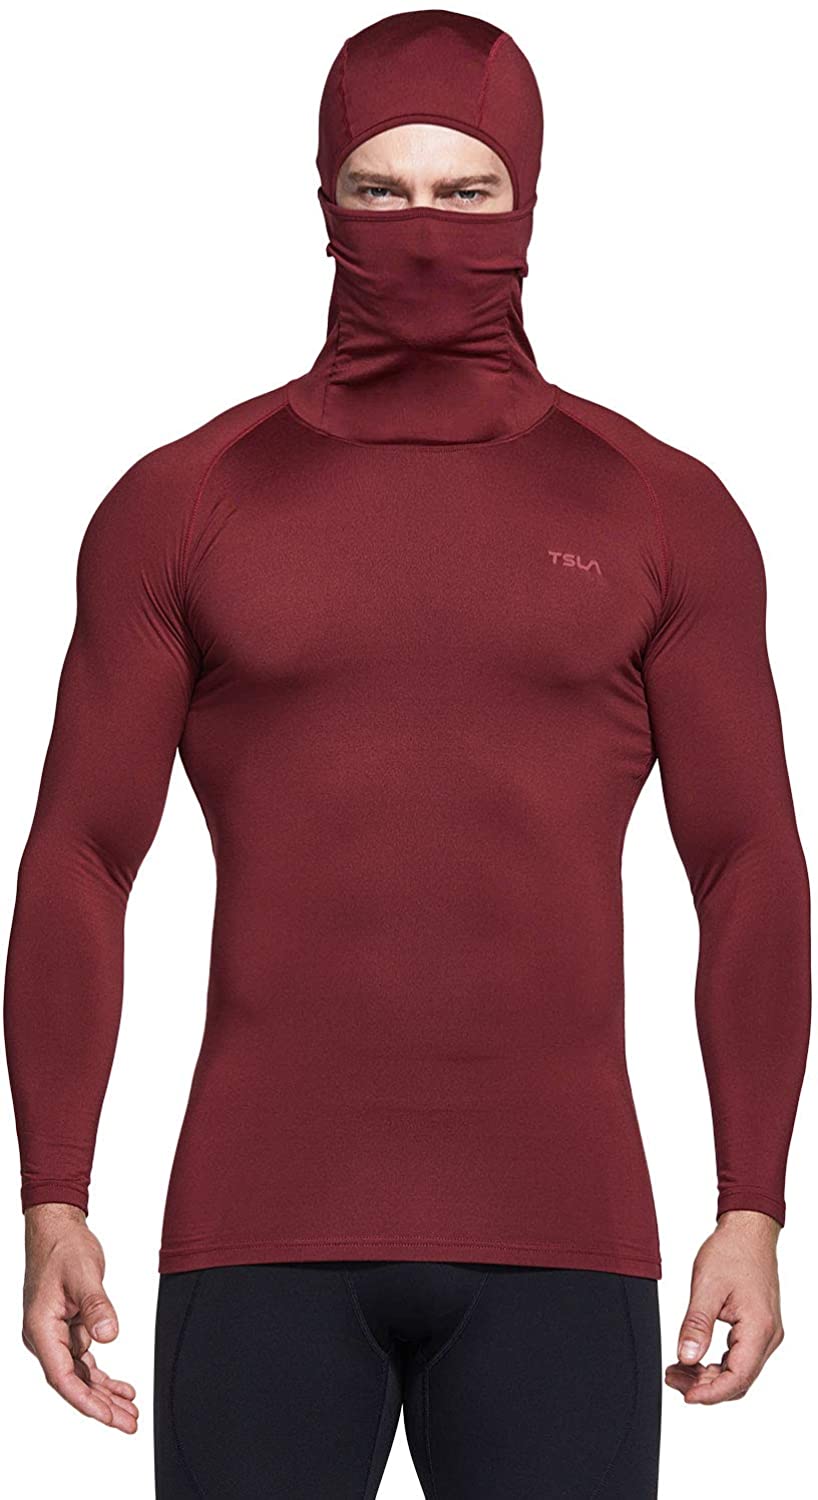 TSLA Men's Thermal Compression Shirts Hoodie with Mask, Long